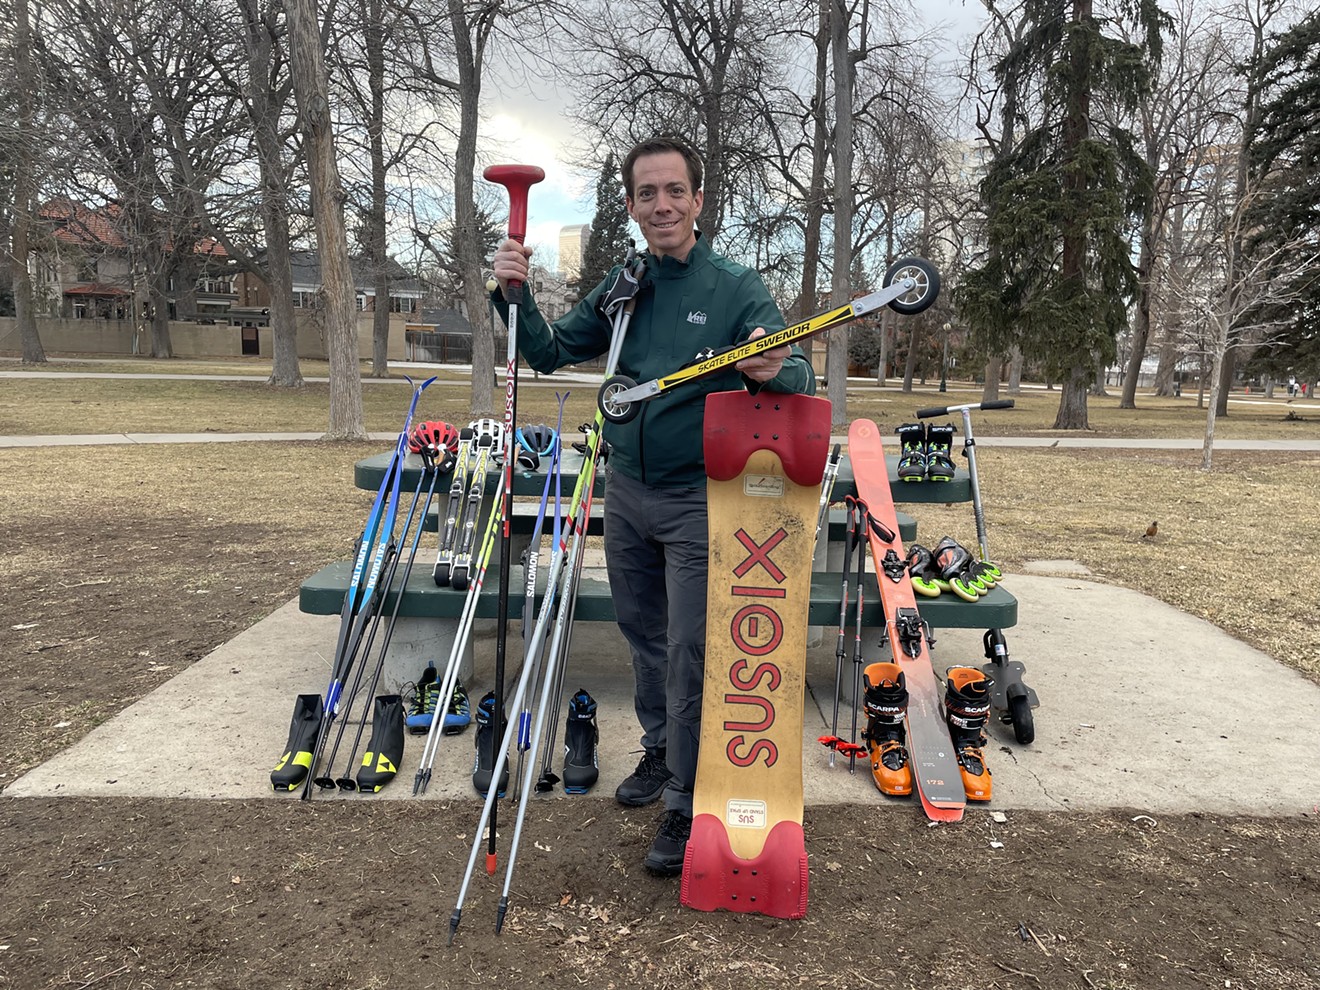 Dan Bowen moved to Denver to ski every day, employing many types of skiing, including SpikeBoarding — the equipment needed is shown here — to reach his goal.